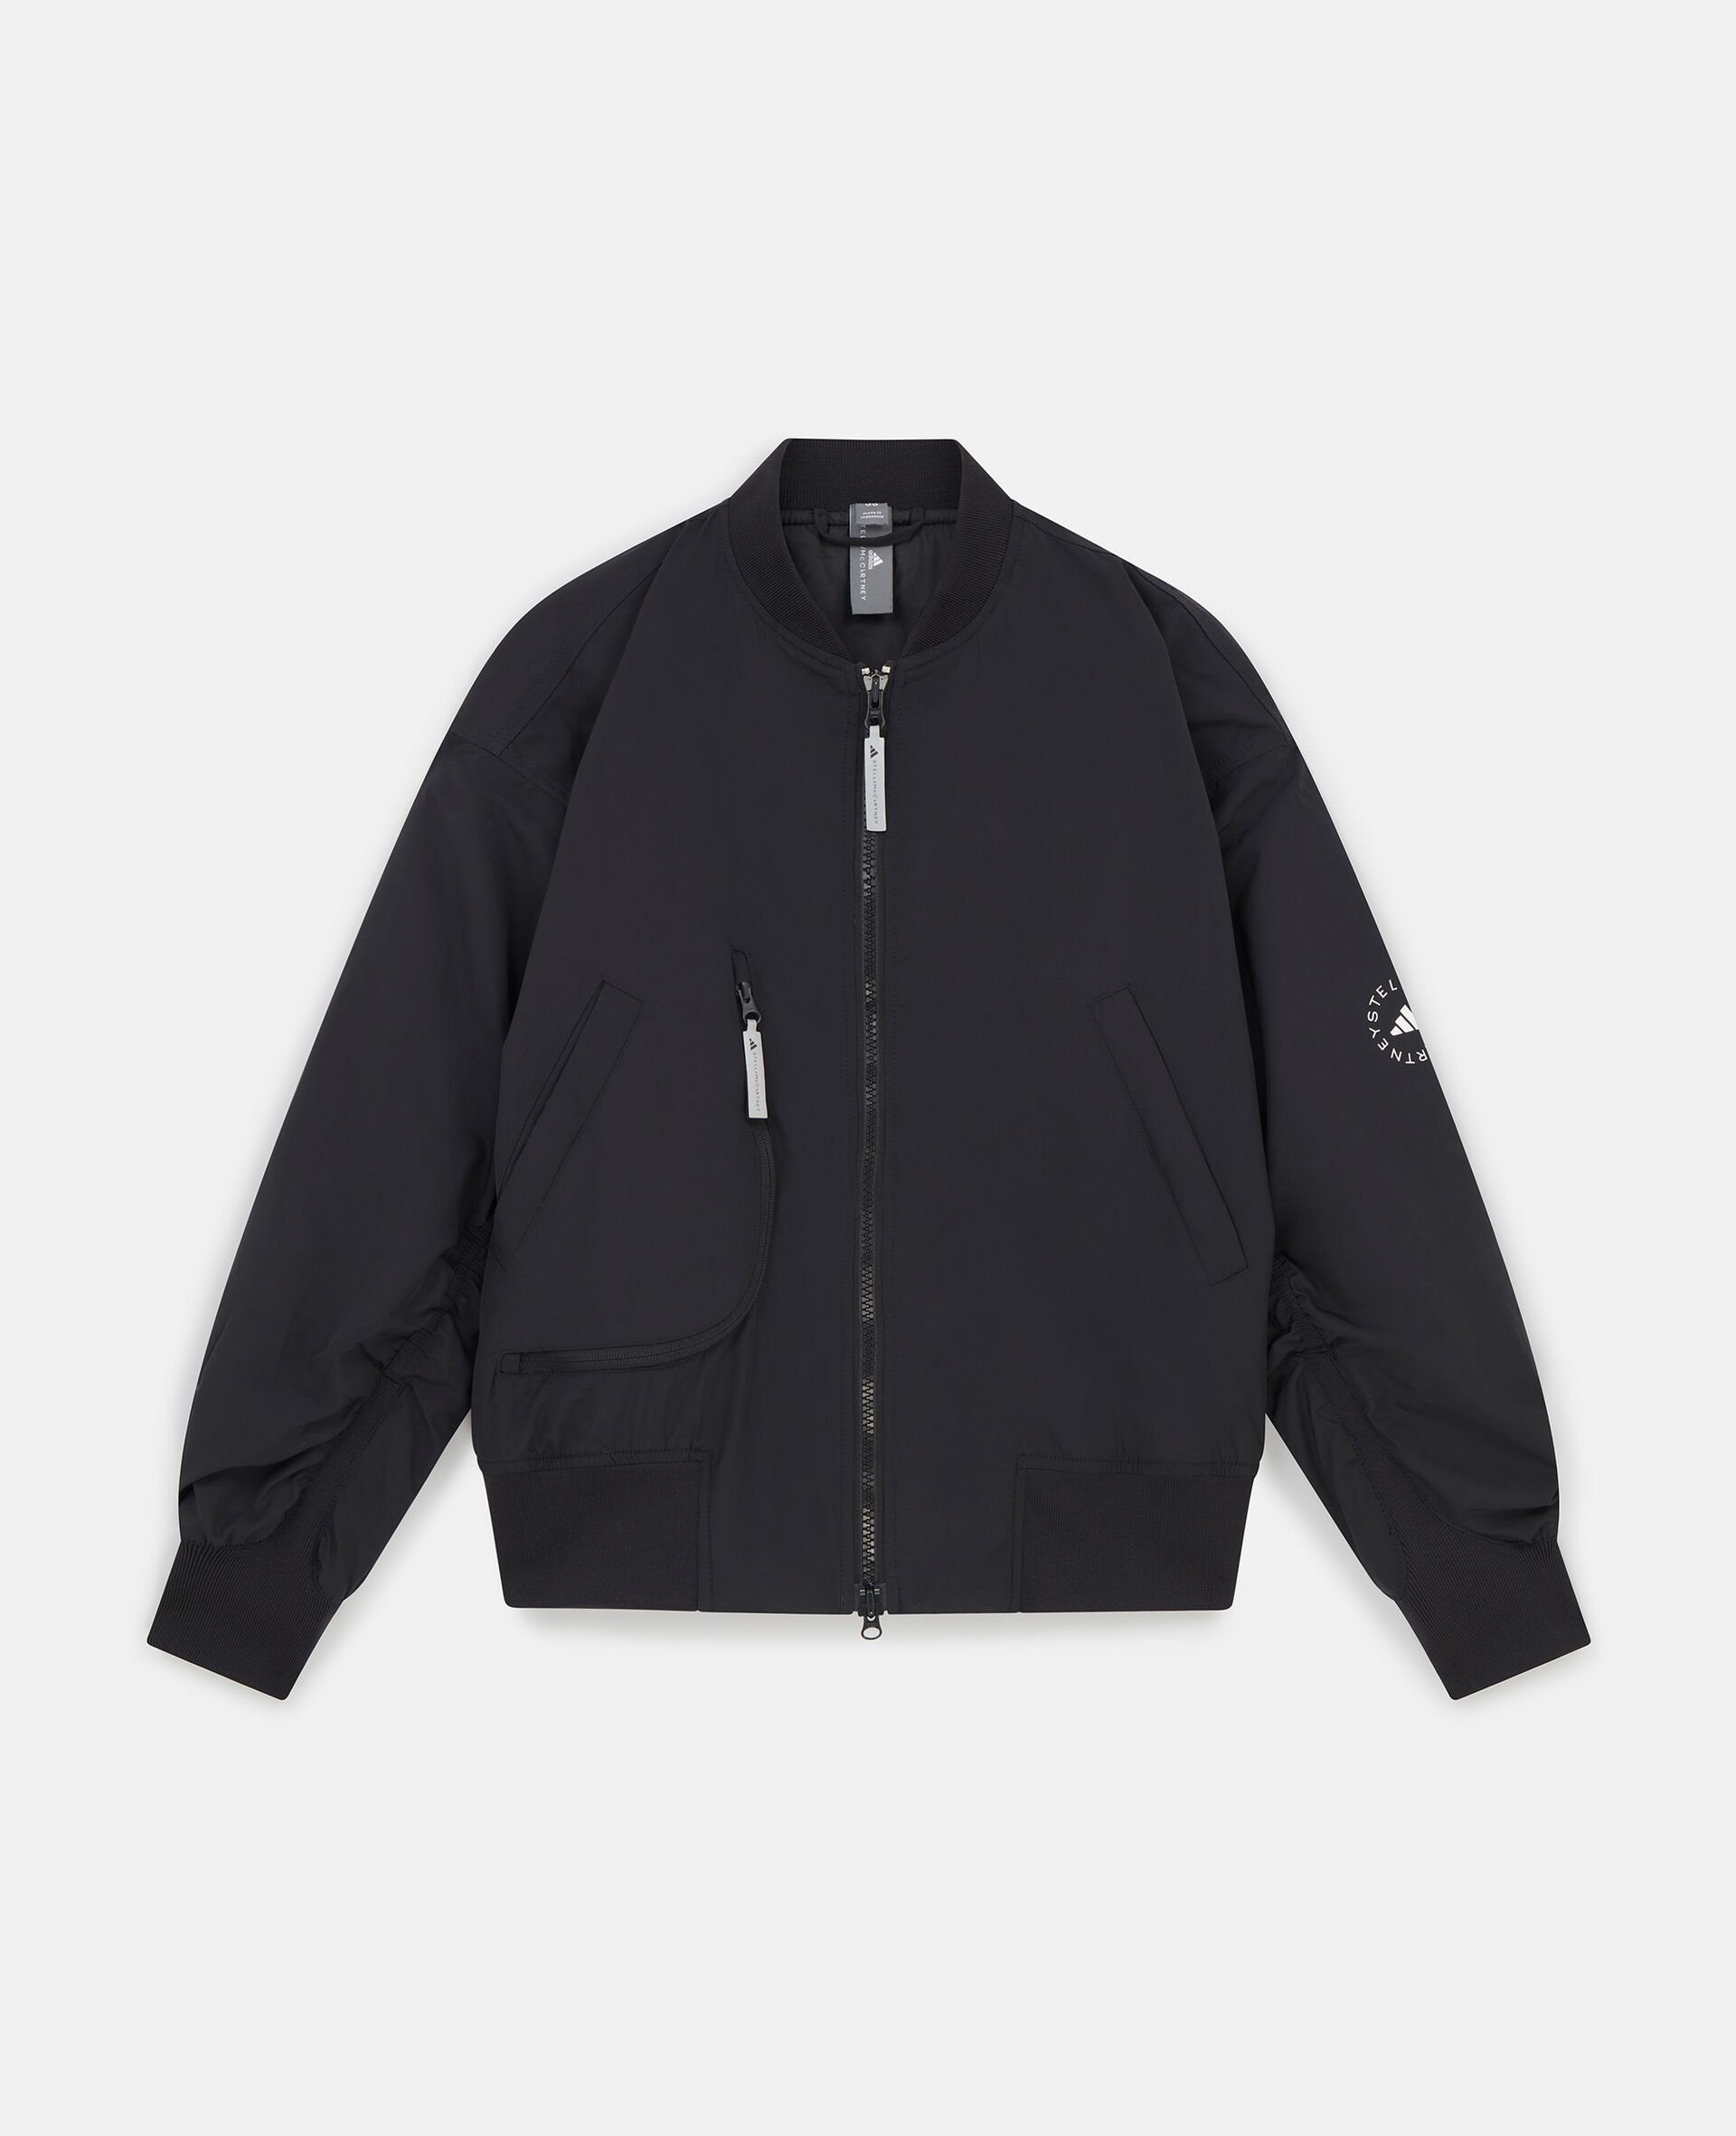 TrueCasuals Woven Bomber Jacket-Black-large image number 0